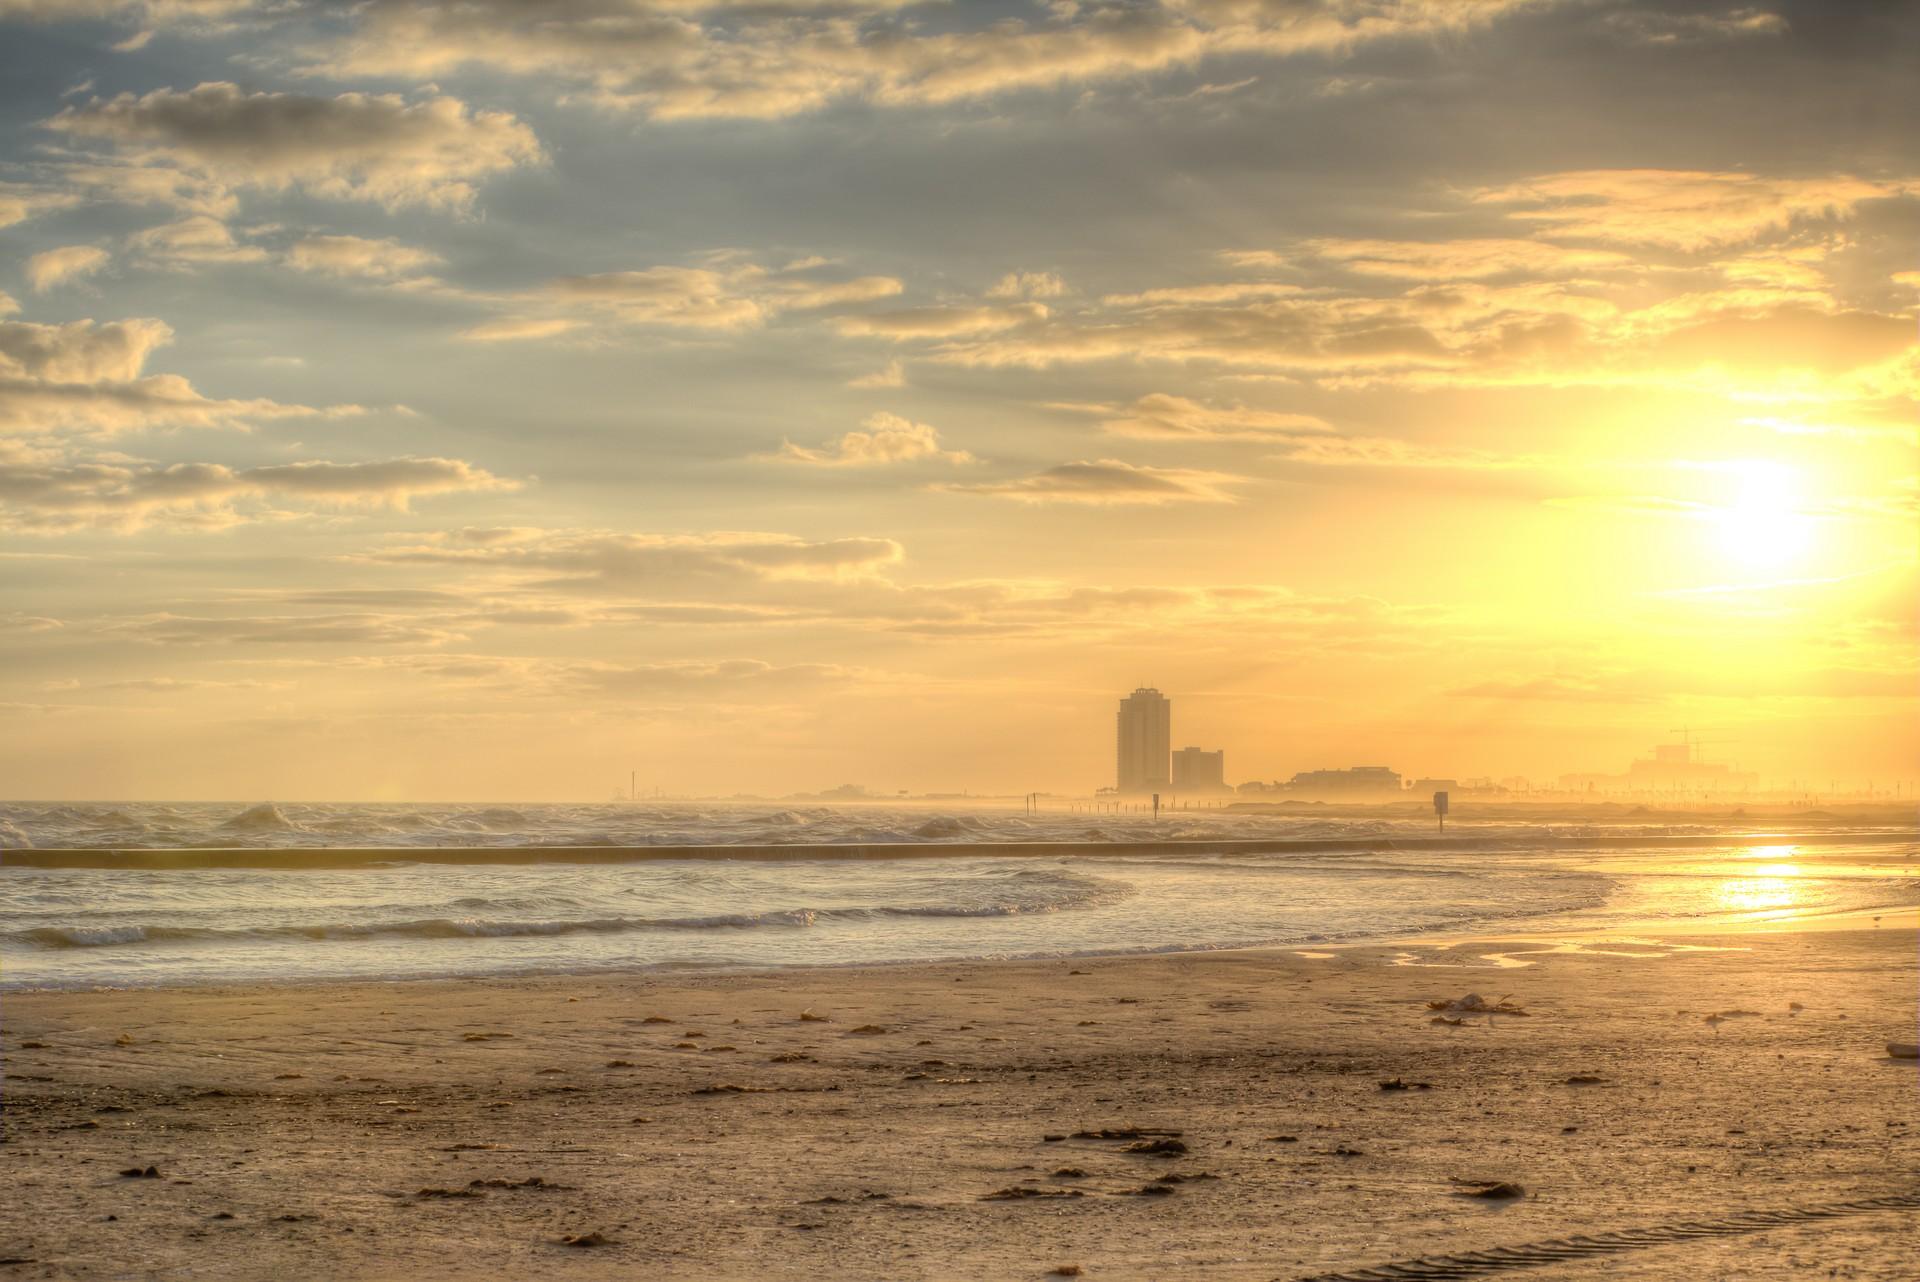 Beach and countryside in Galveston at sunset time